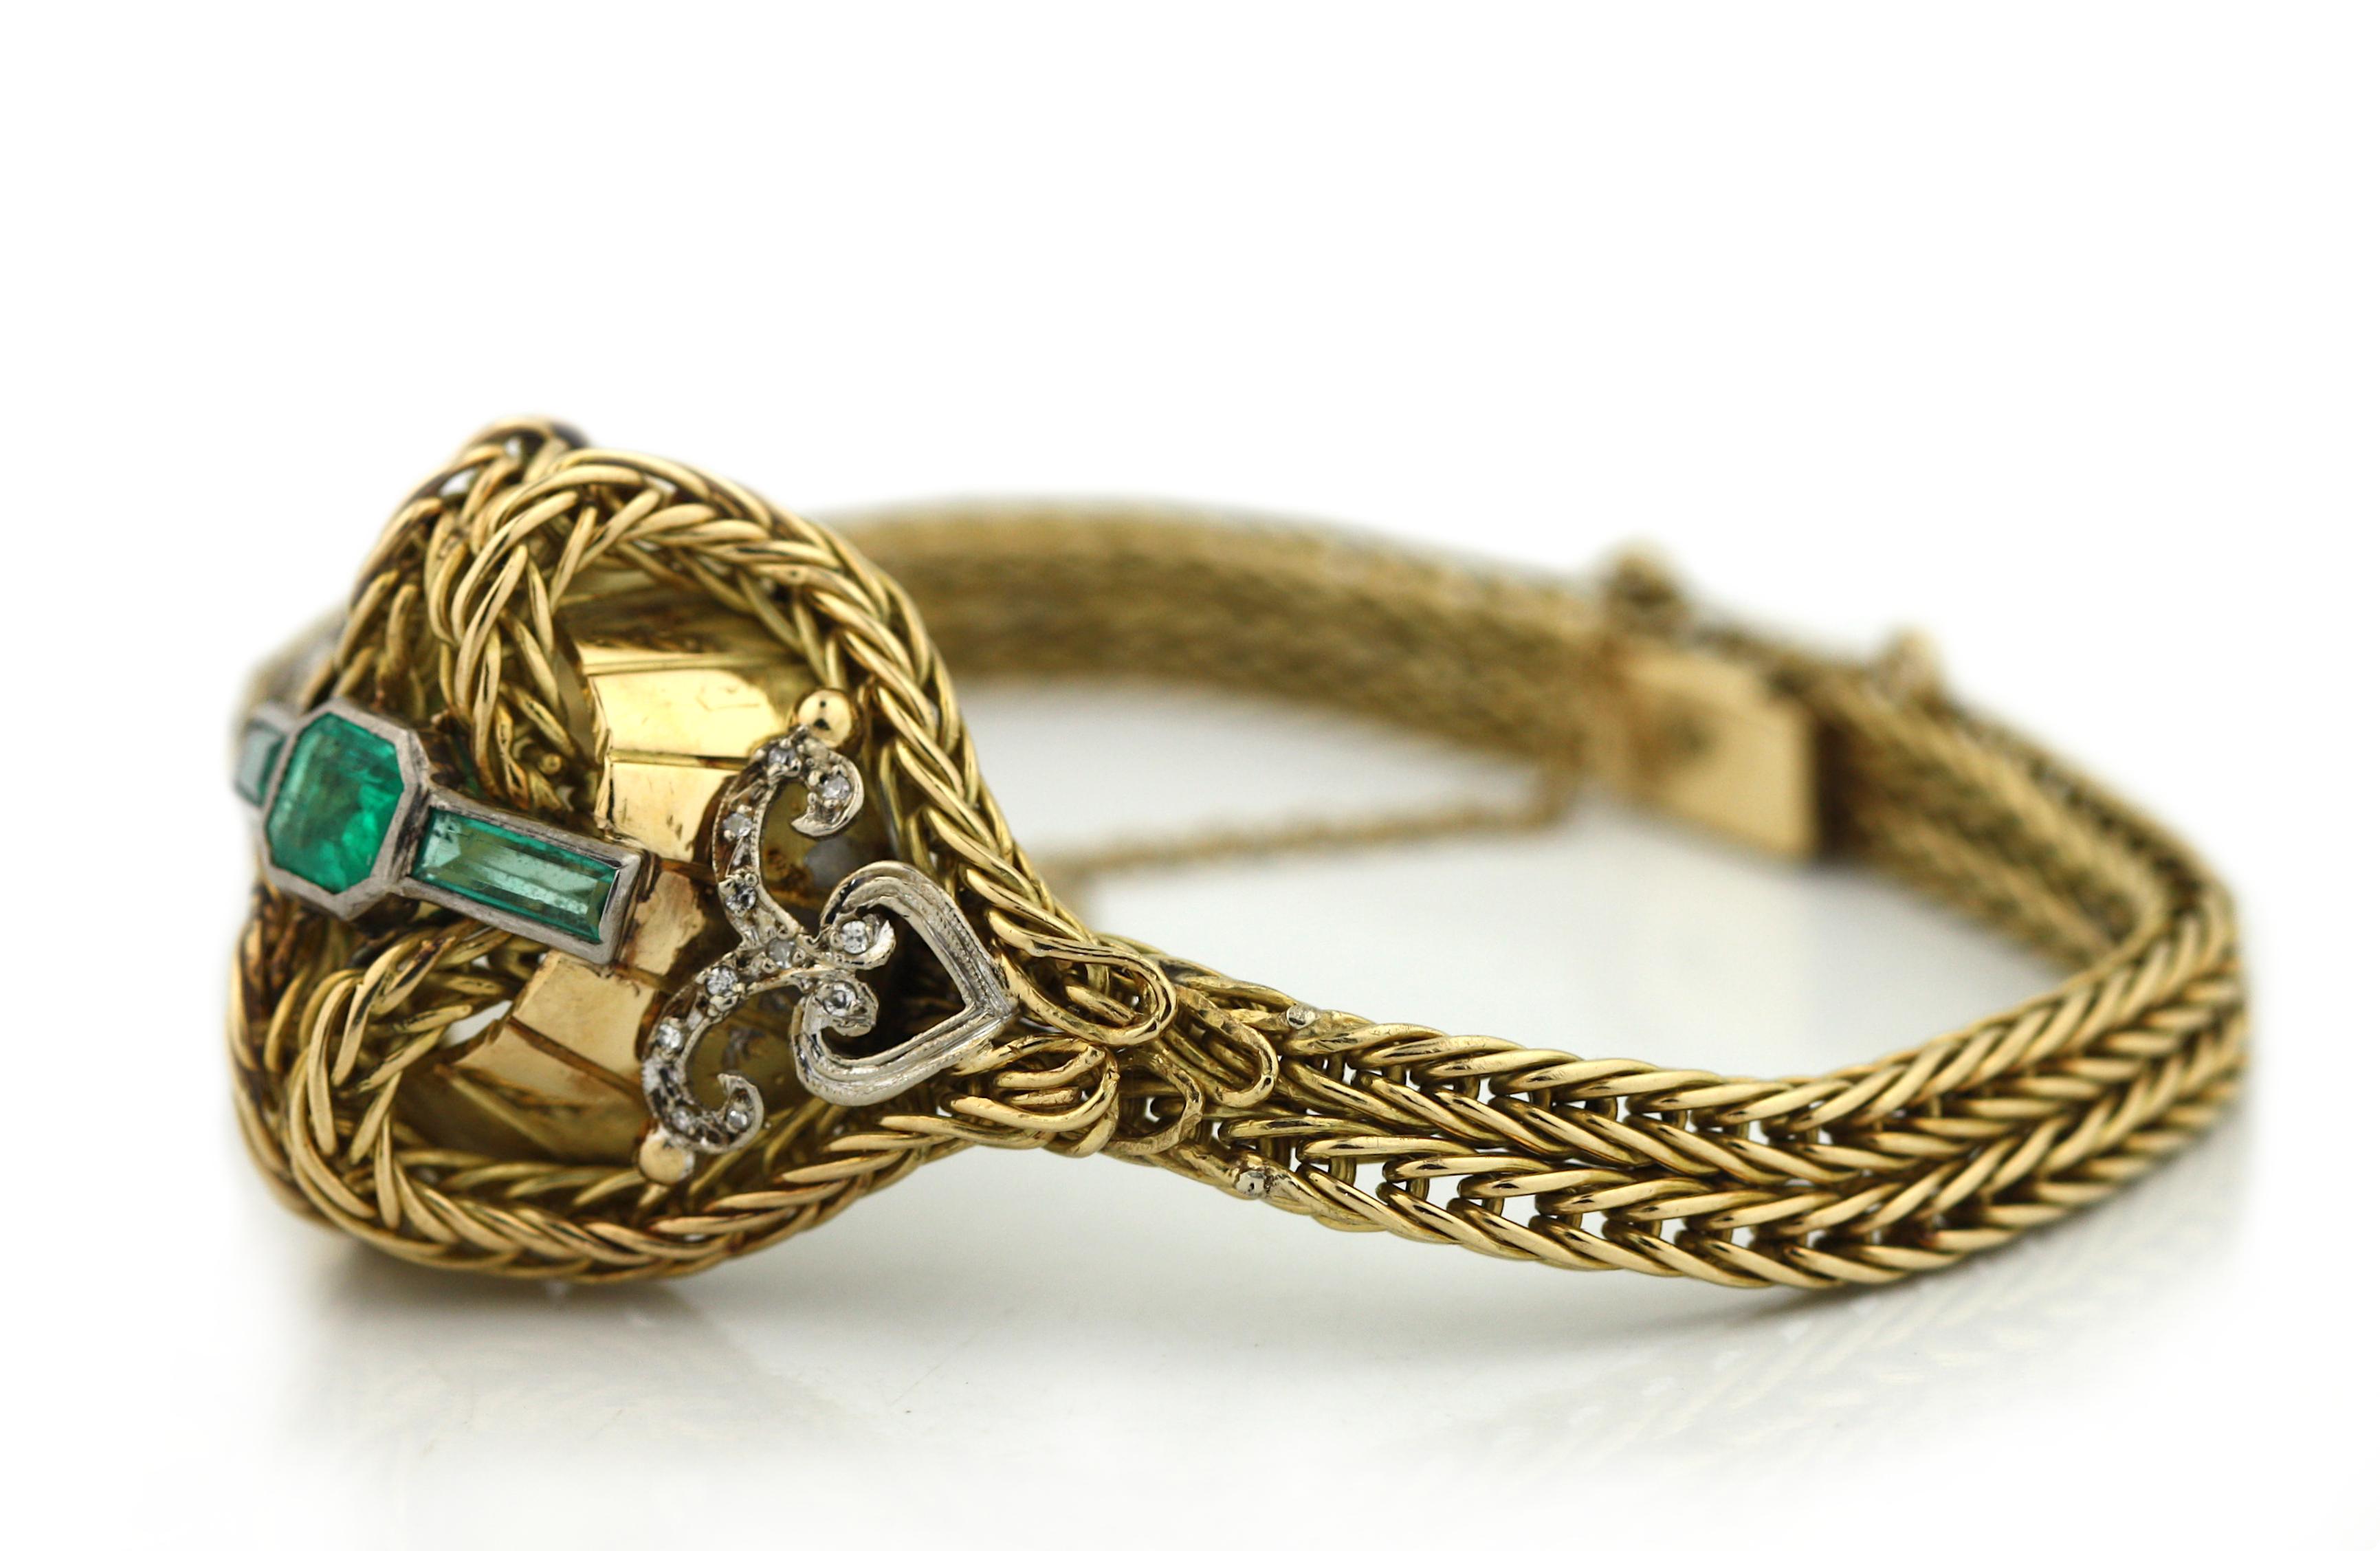 
18 karat Gold, Colored Stone and Diamond Bracelet
Composed of woven ropetwist links, accented by bands of diamonds.
Diamonds weighing a total of approximately .60 carats
Length 7 inches
Signed
Gross weight approximately 27.6 dwts